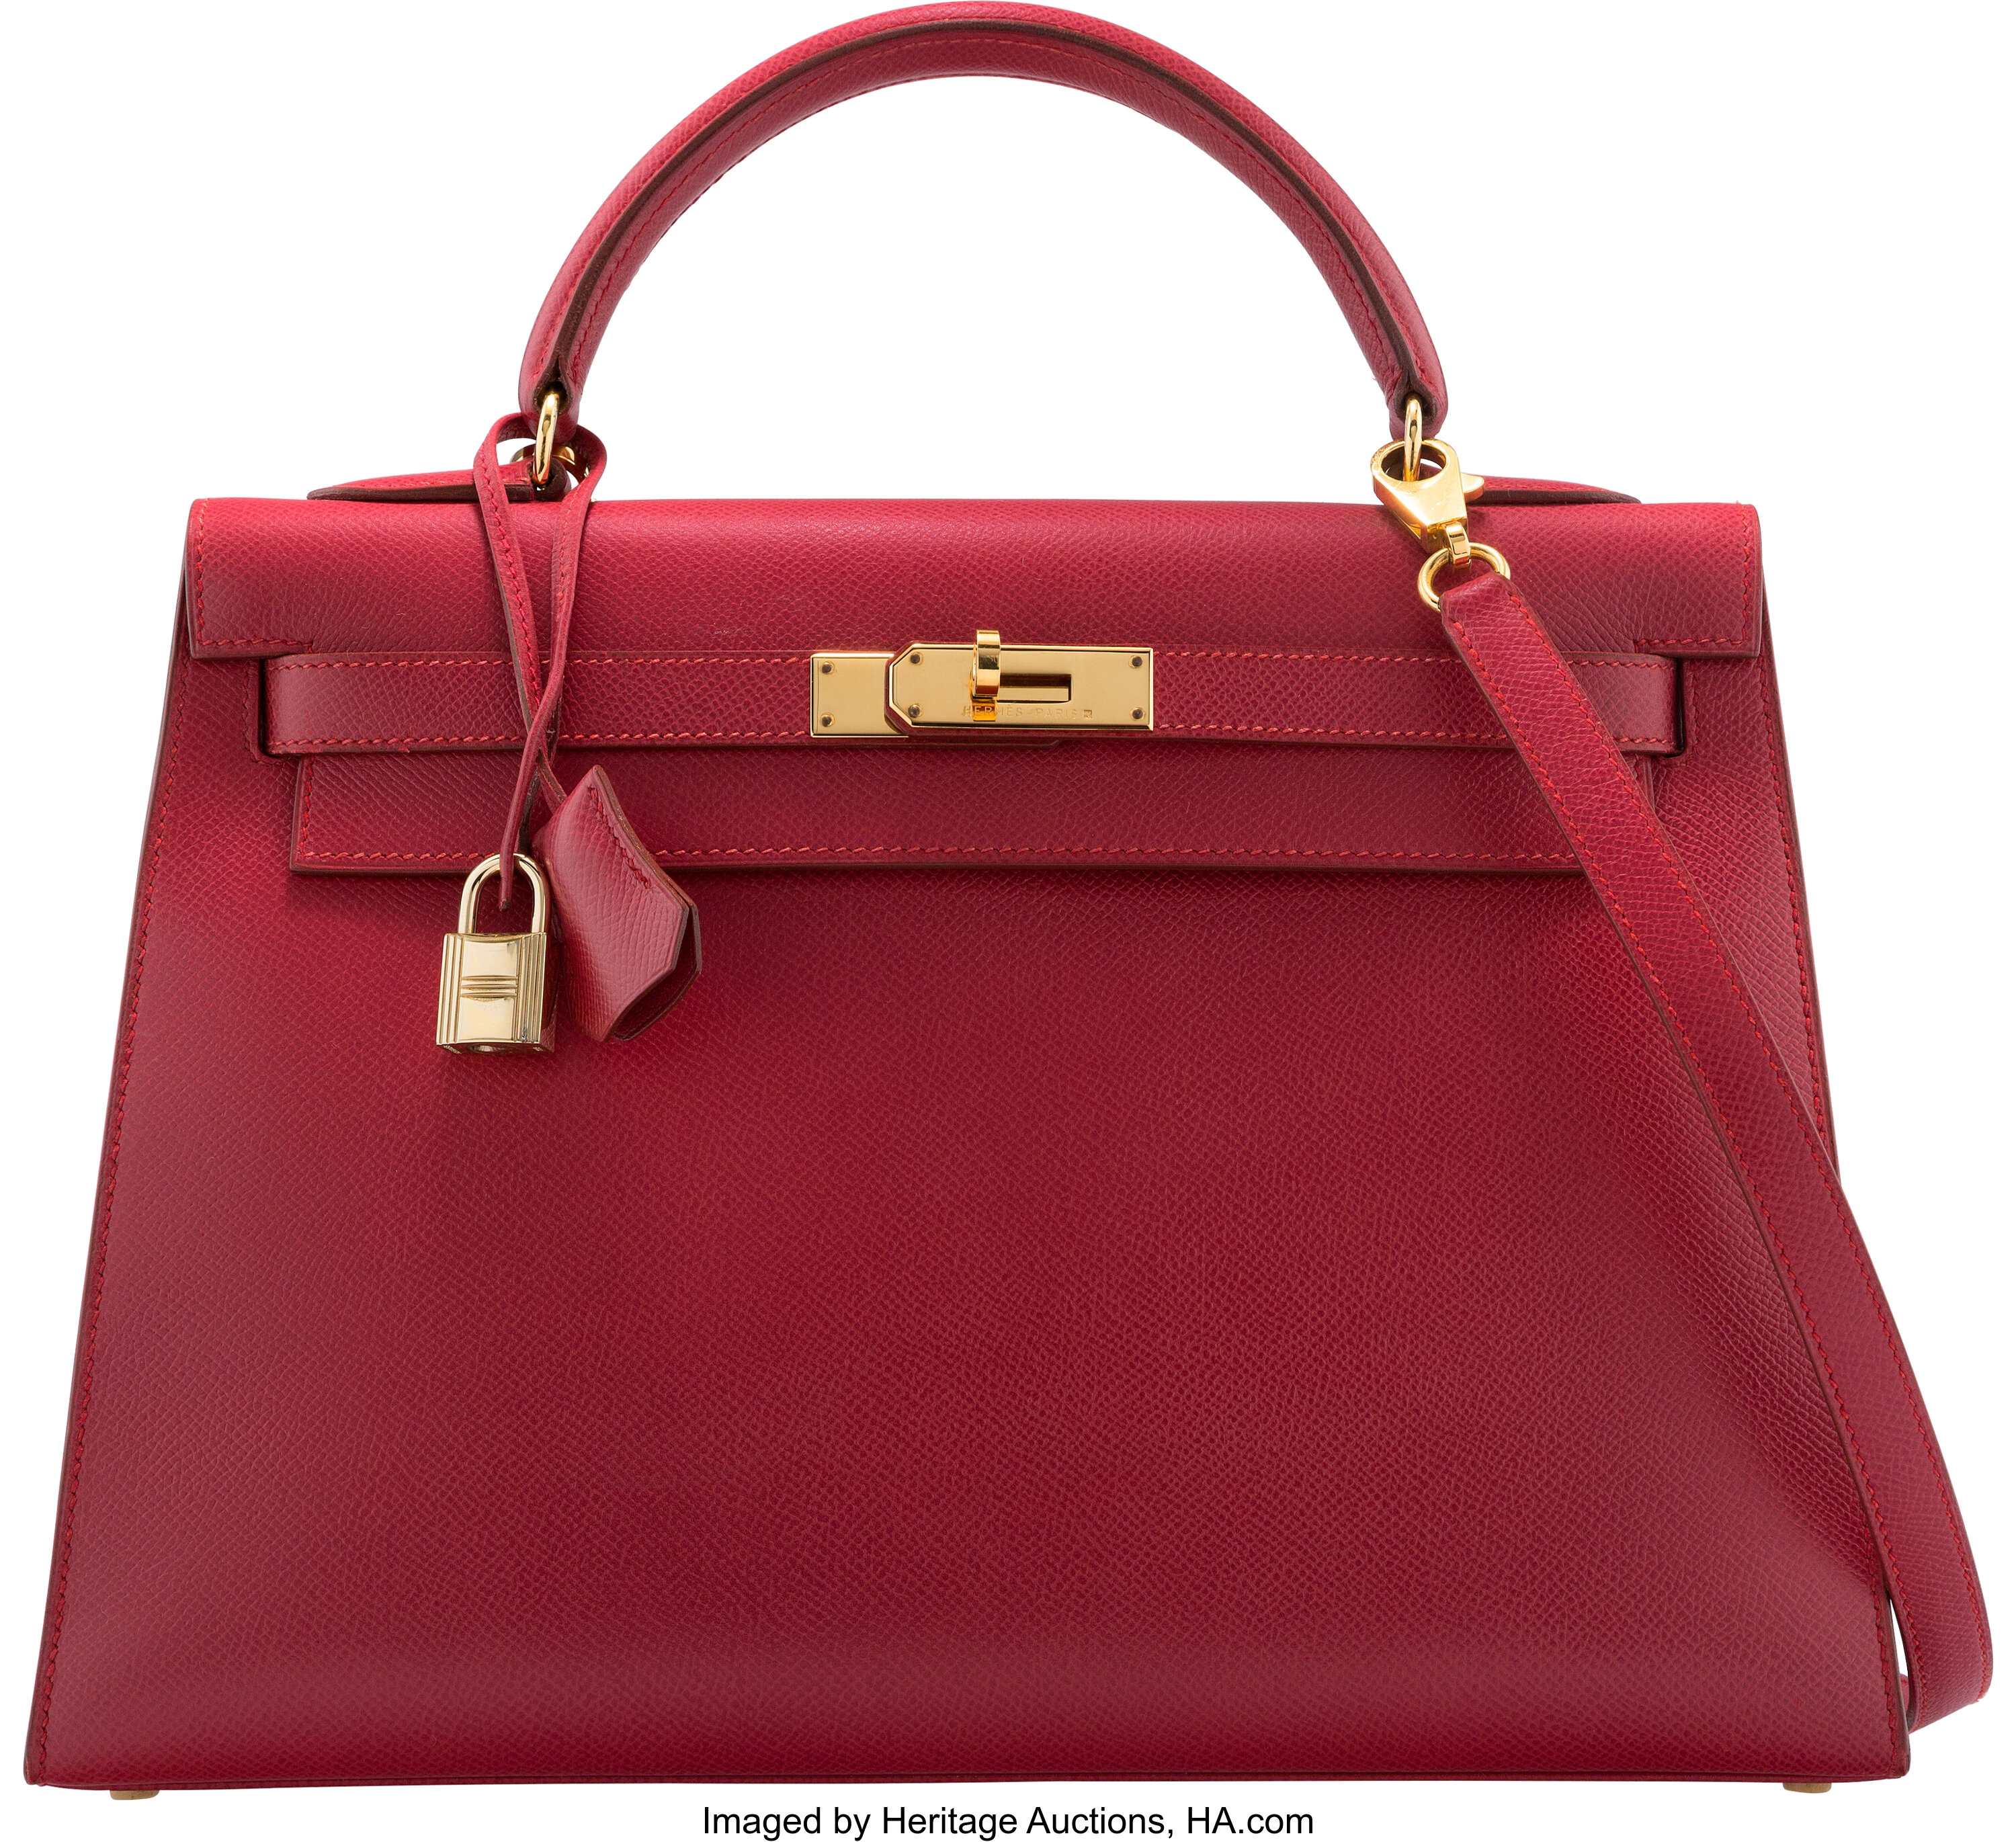 HERMES KELLY 32 Graine Couchevel leather Rouge vif □A Engraving